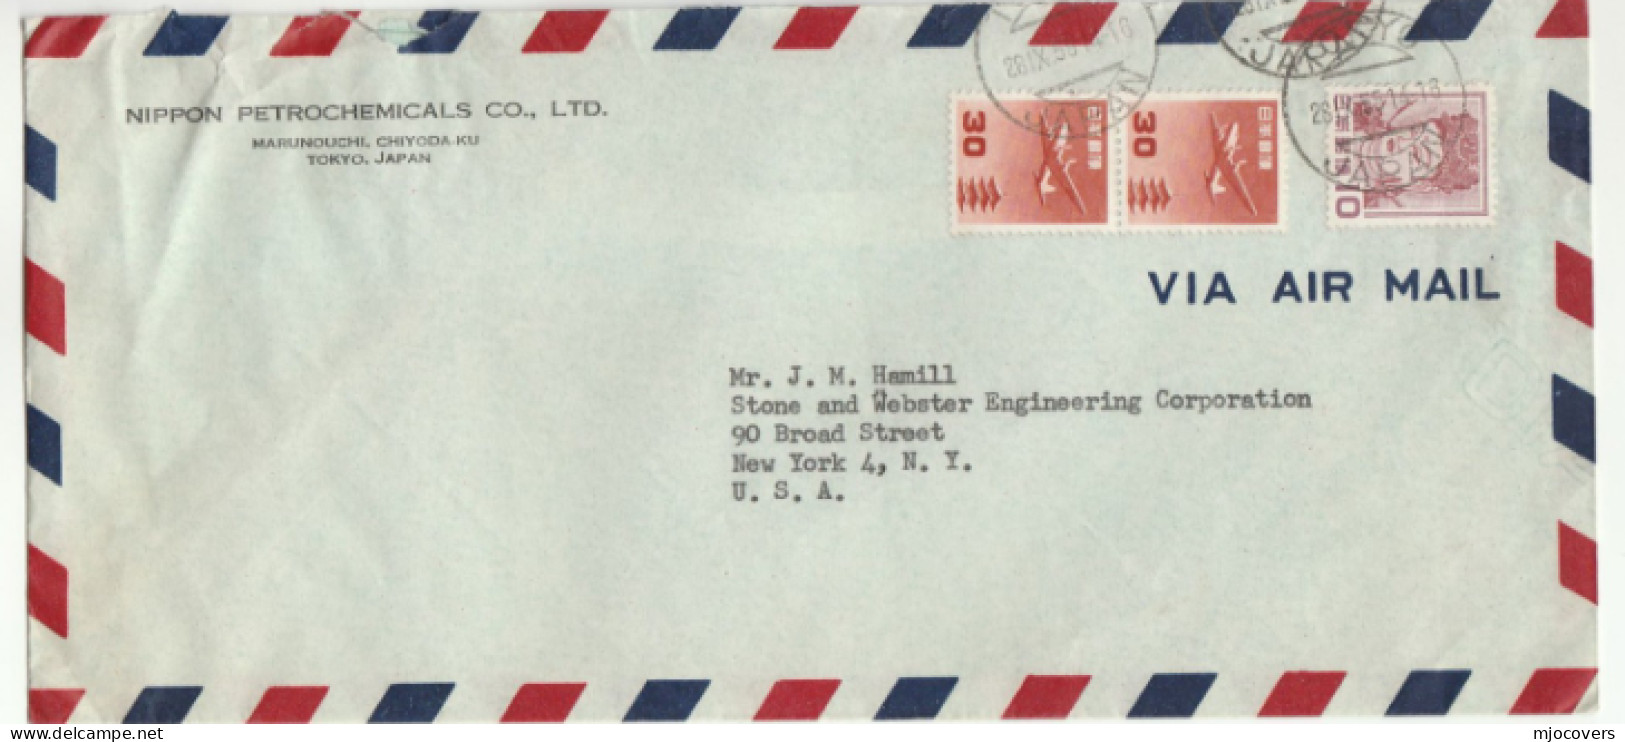 1955 NIPPON PETROCHEMICALS Co Japan COVER Airmail To Stone & Webster ENGINEERING Co USA Energy Oil Minerals Stamps - Erdöl